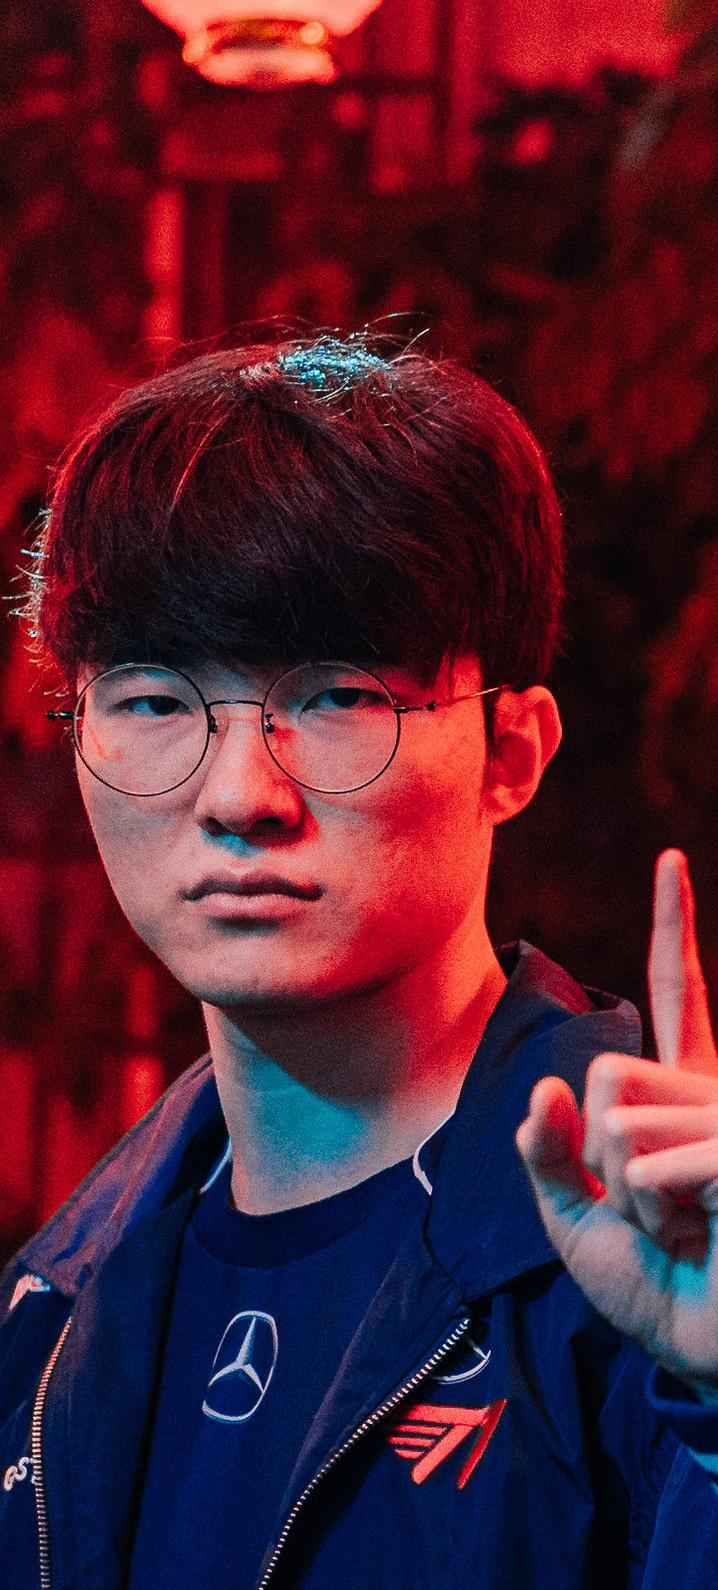 T1-Faker-reveals-physical-and-emotional-toll-behind-a-decade-of-greatness